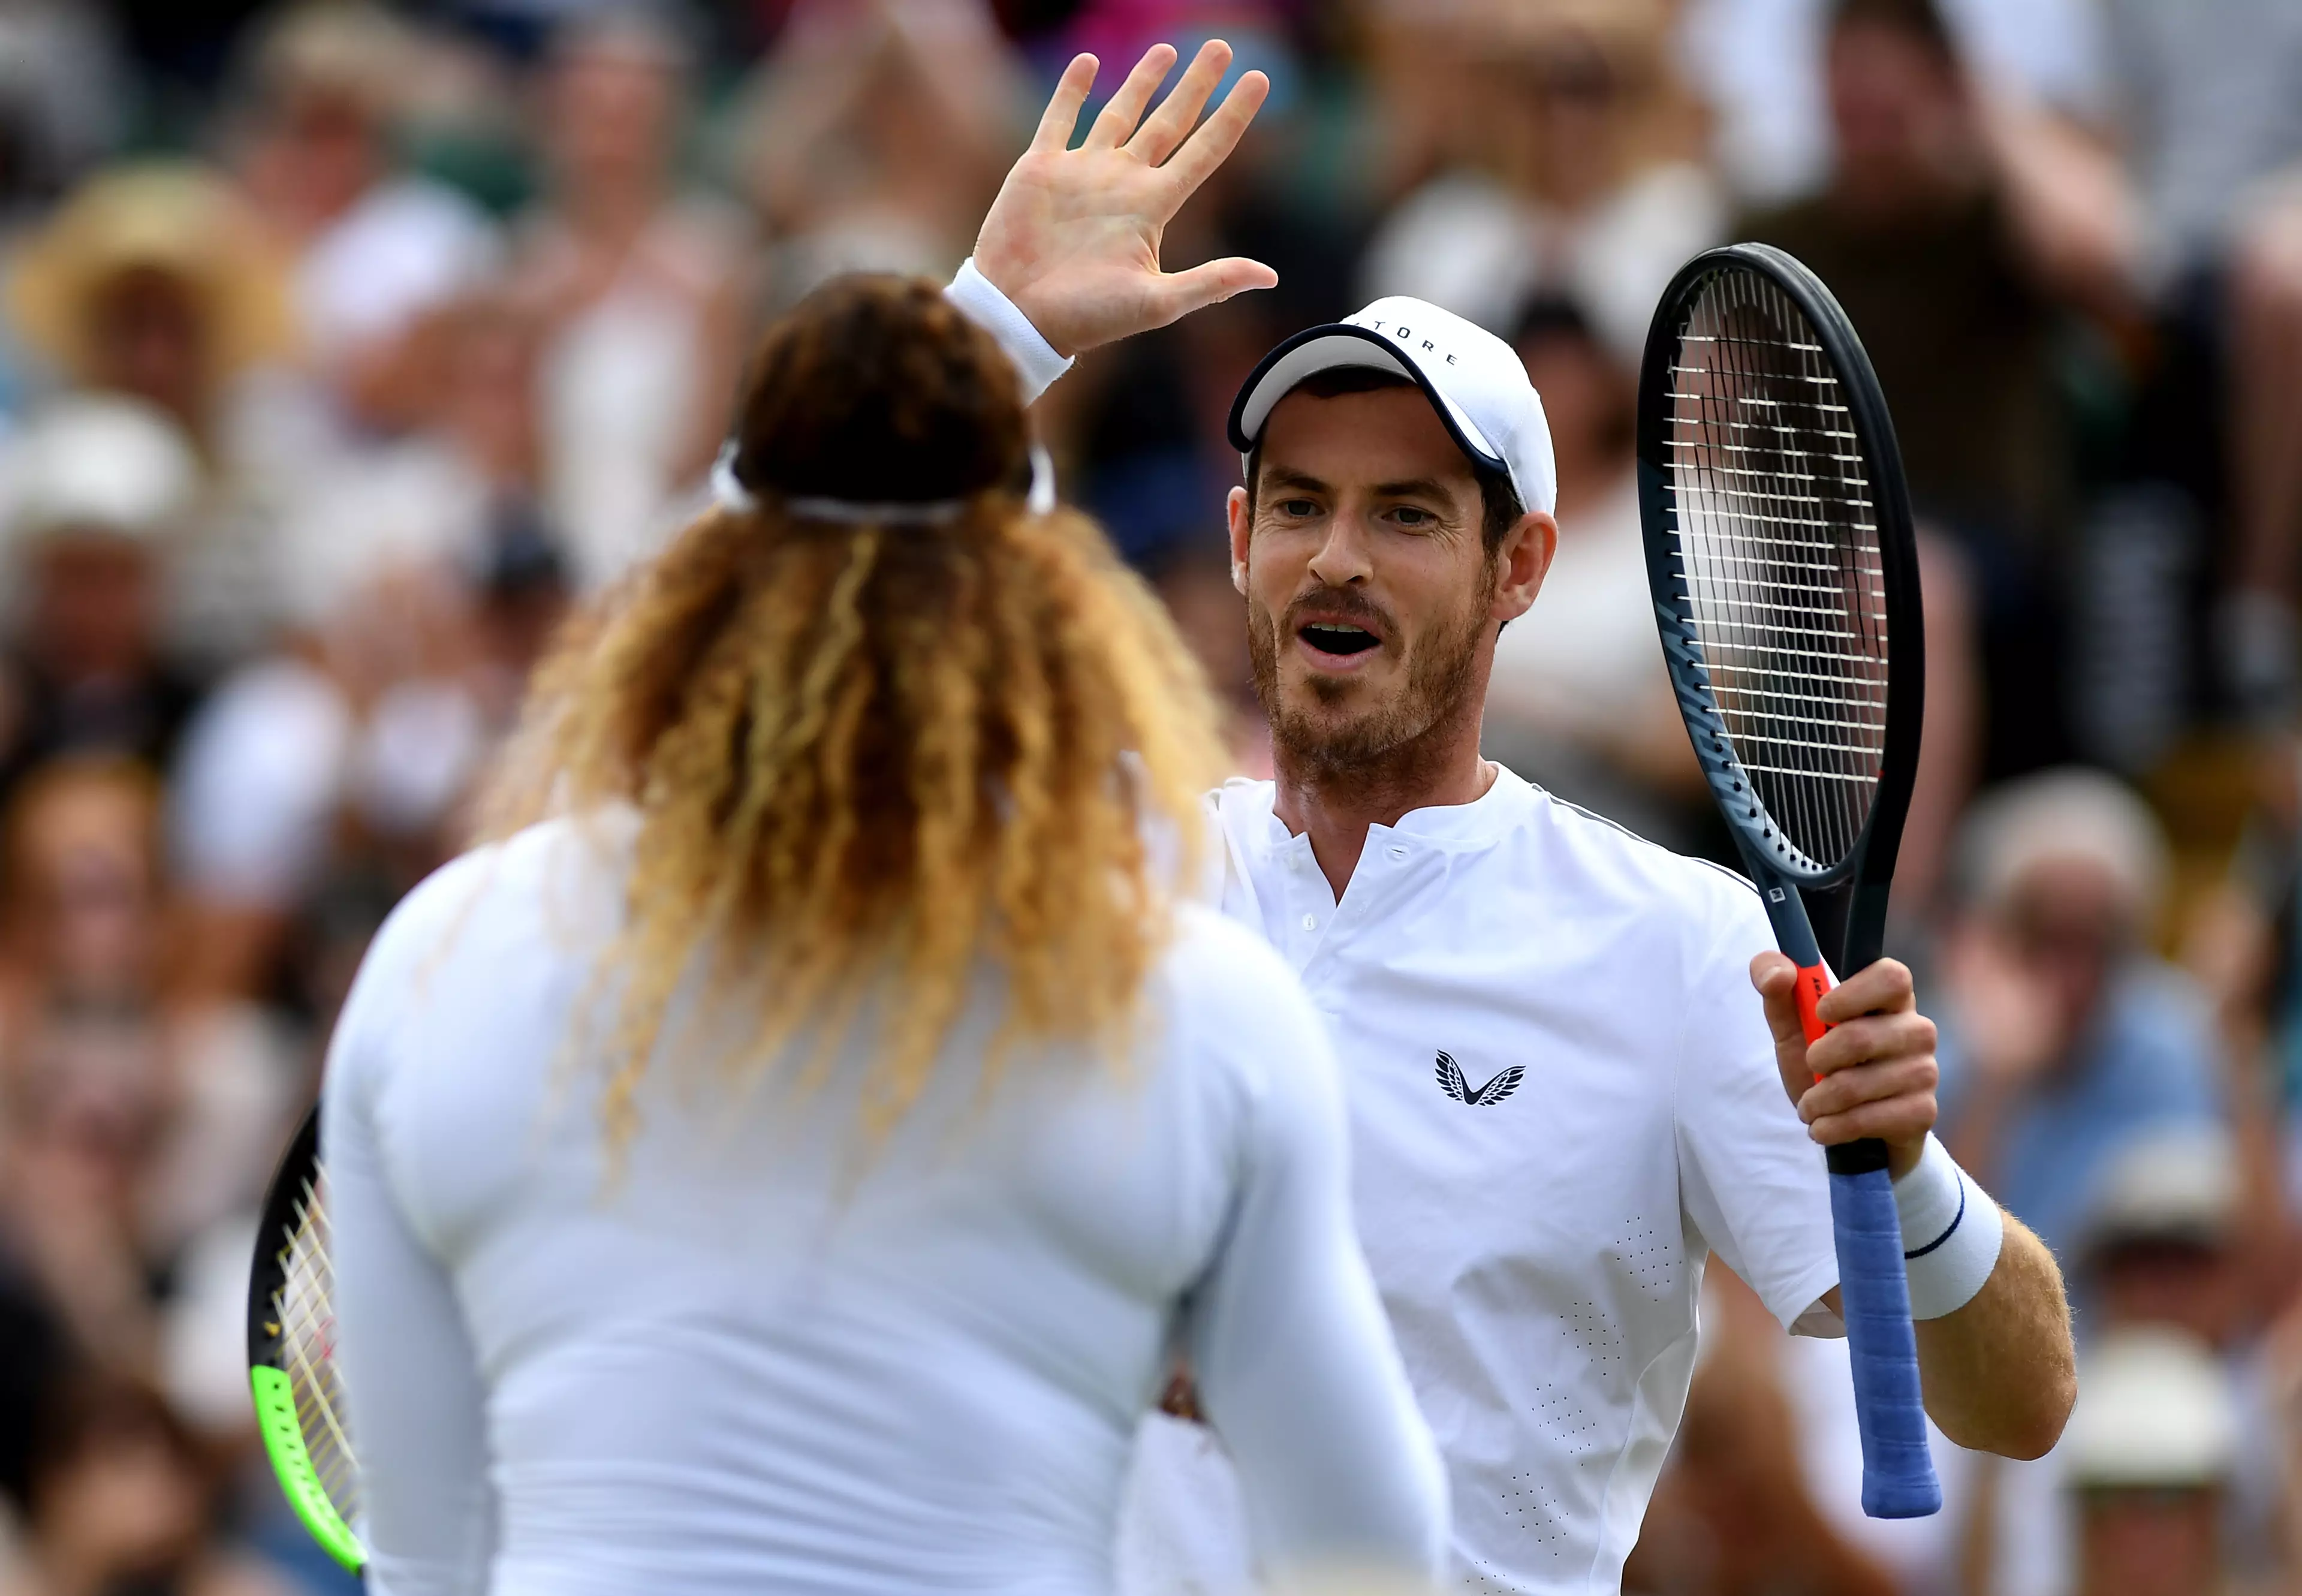 Murray and Williams have delighted crowds at Wimbledon.